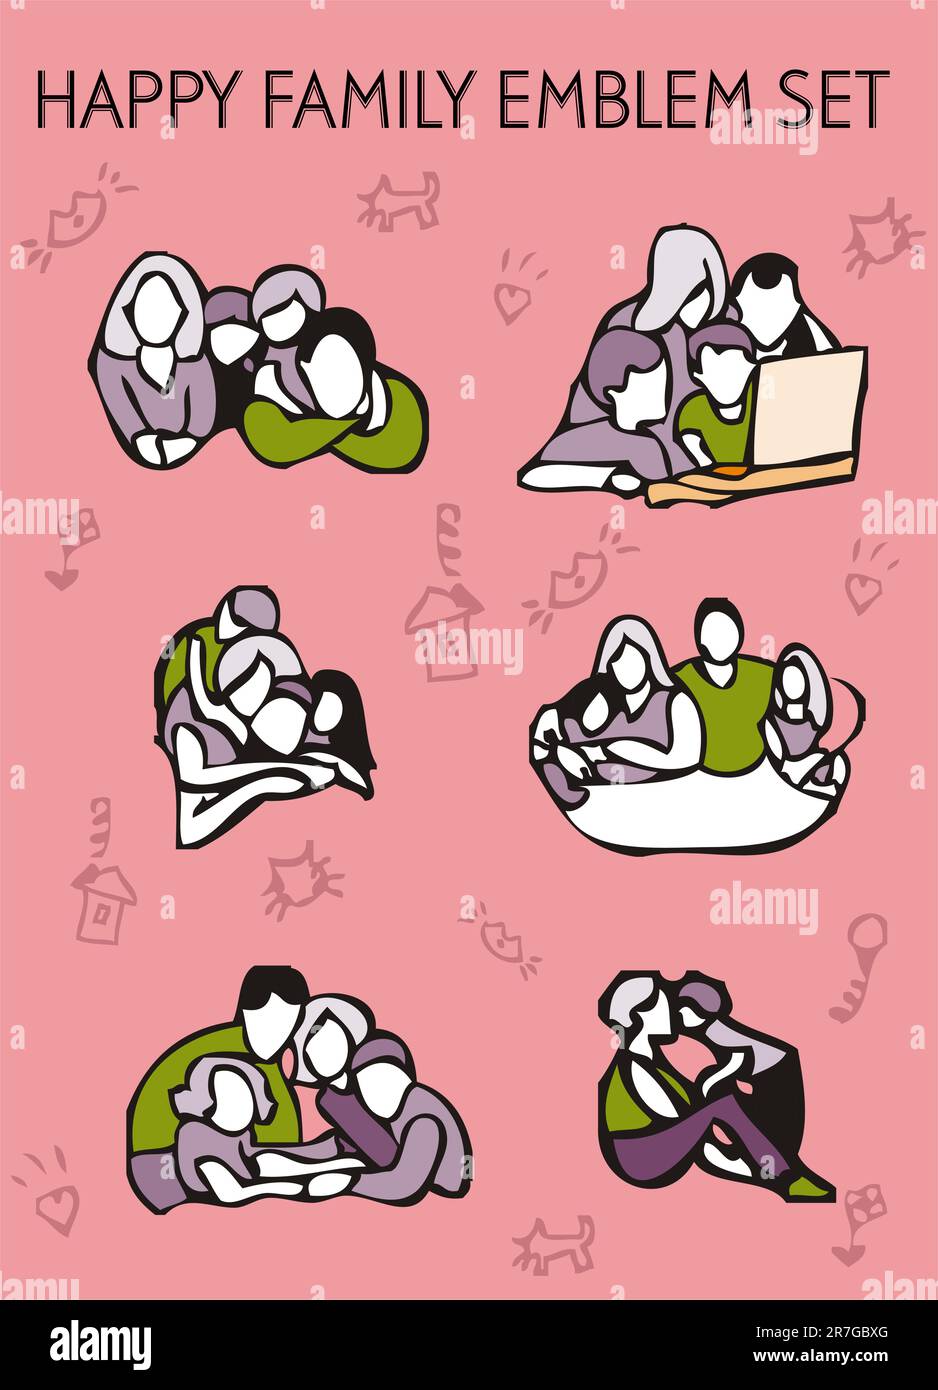 happy family emblem. icon set, symbolic illustrations of people and families Stock Vector